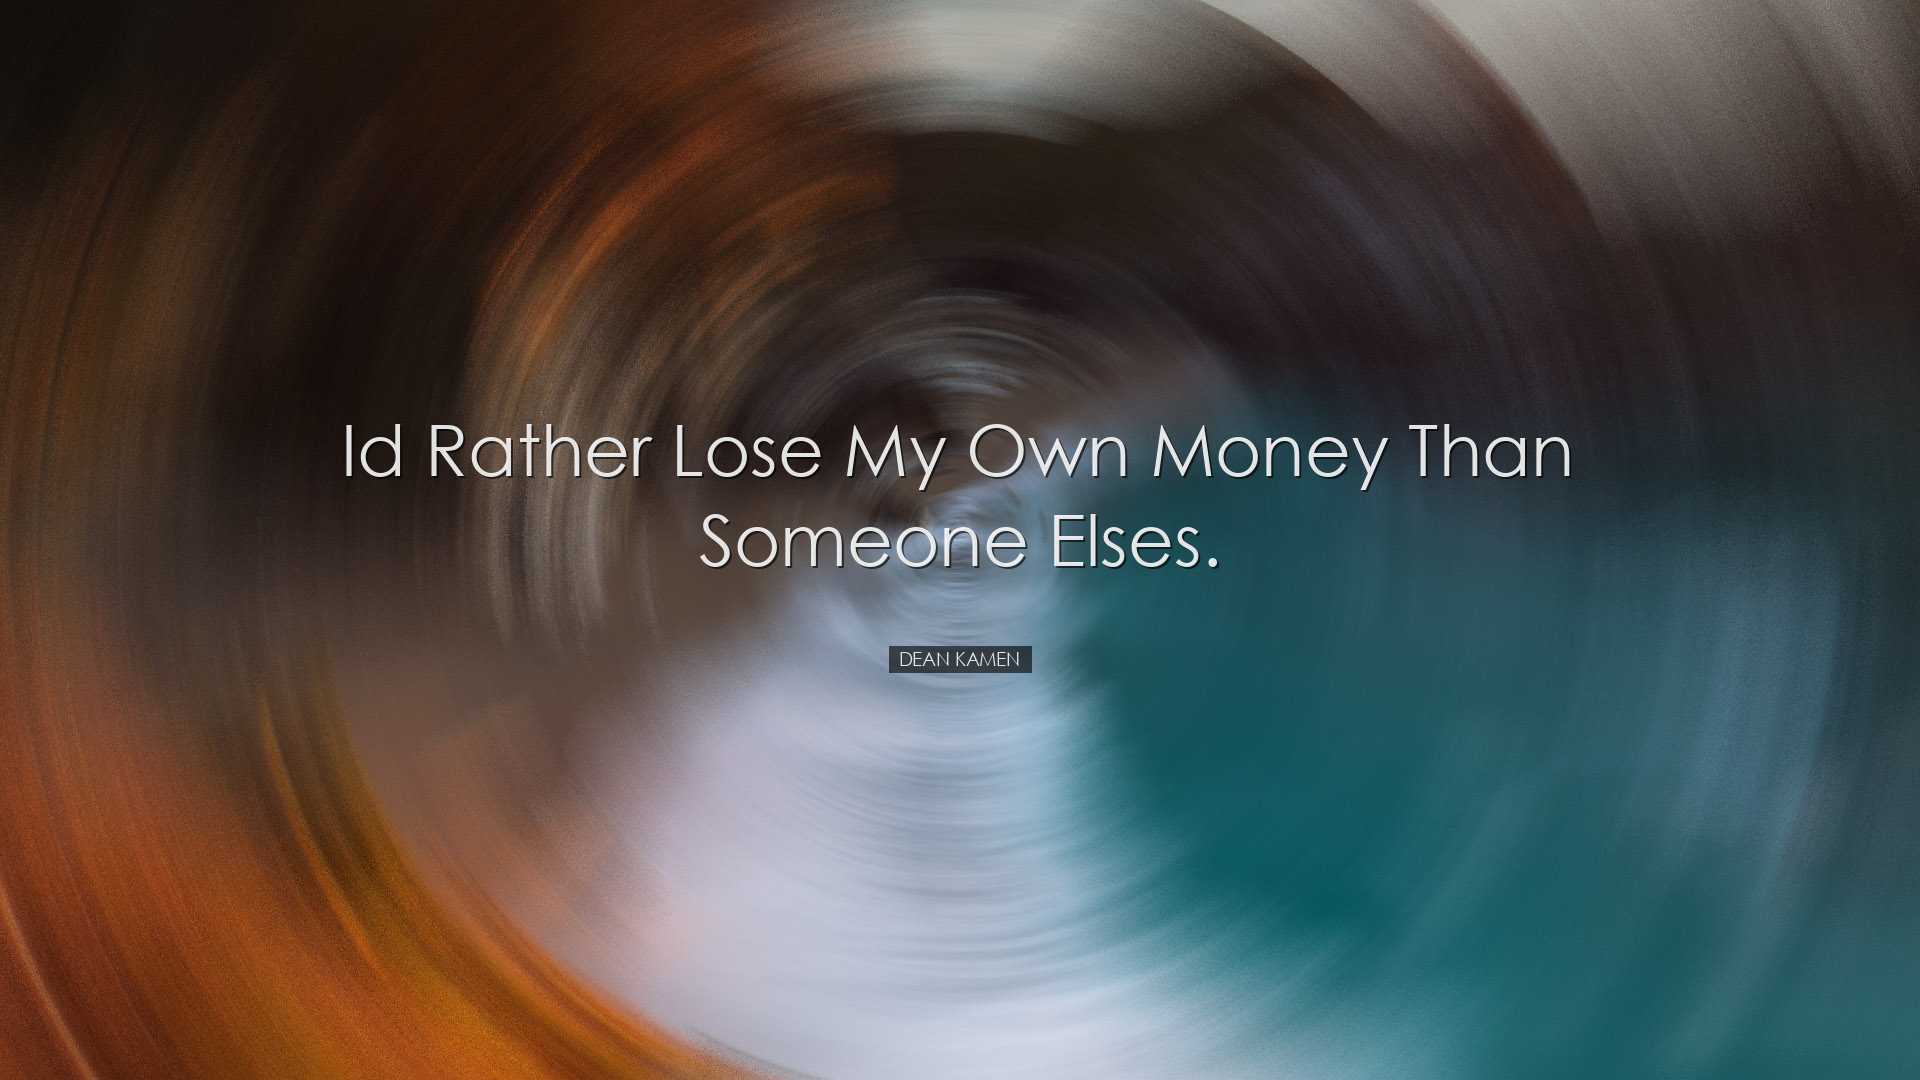 Id rather lose my own money than someone elses. - Dean Kamen